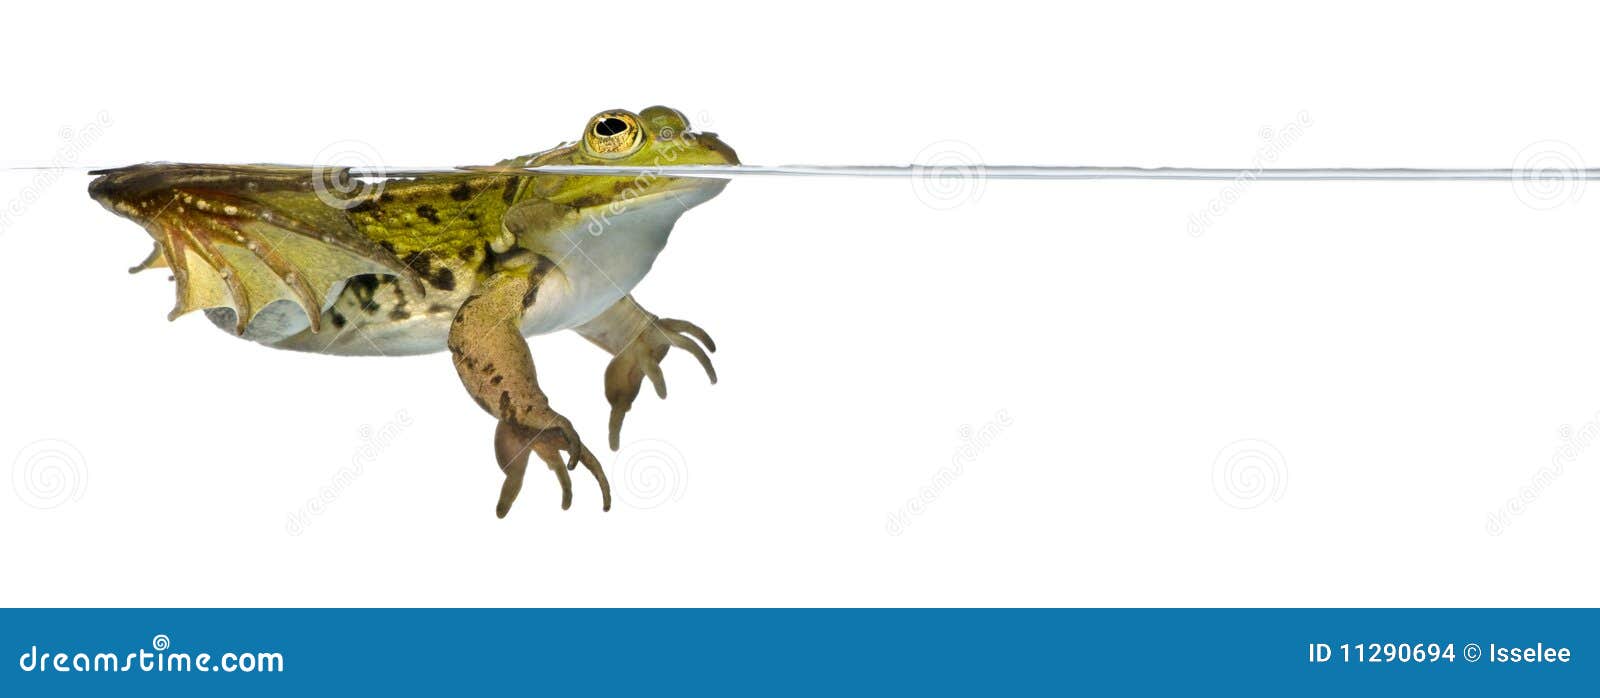 frog floating in water against white background